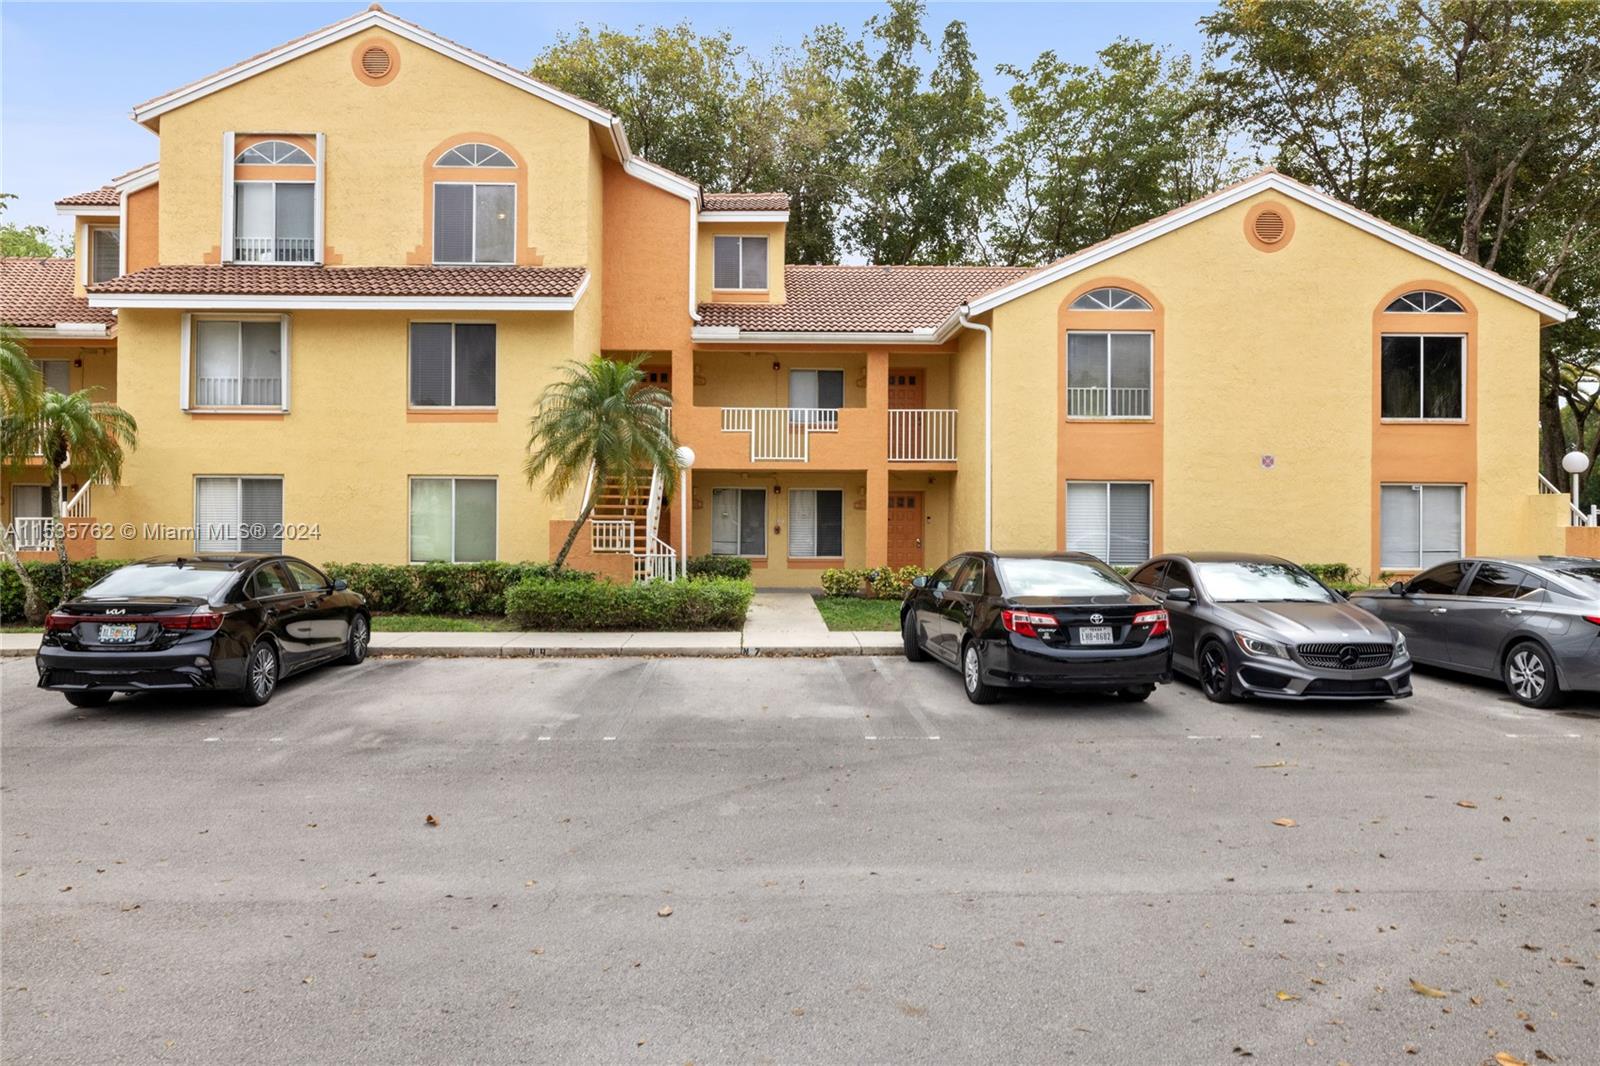 1204 Coral Club Dr 1204, Coral Springs, Florida 33071, 2 Bedrooms Bedrooms, ,2 BathroomsBathrooms,Residentiallease,For Rent,1204 Coral Club Dr 1204,A11535762